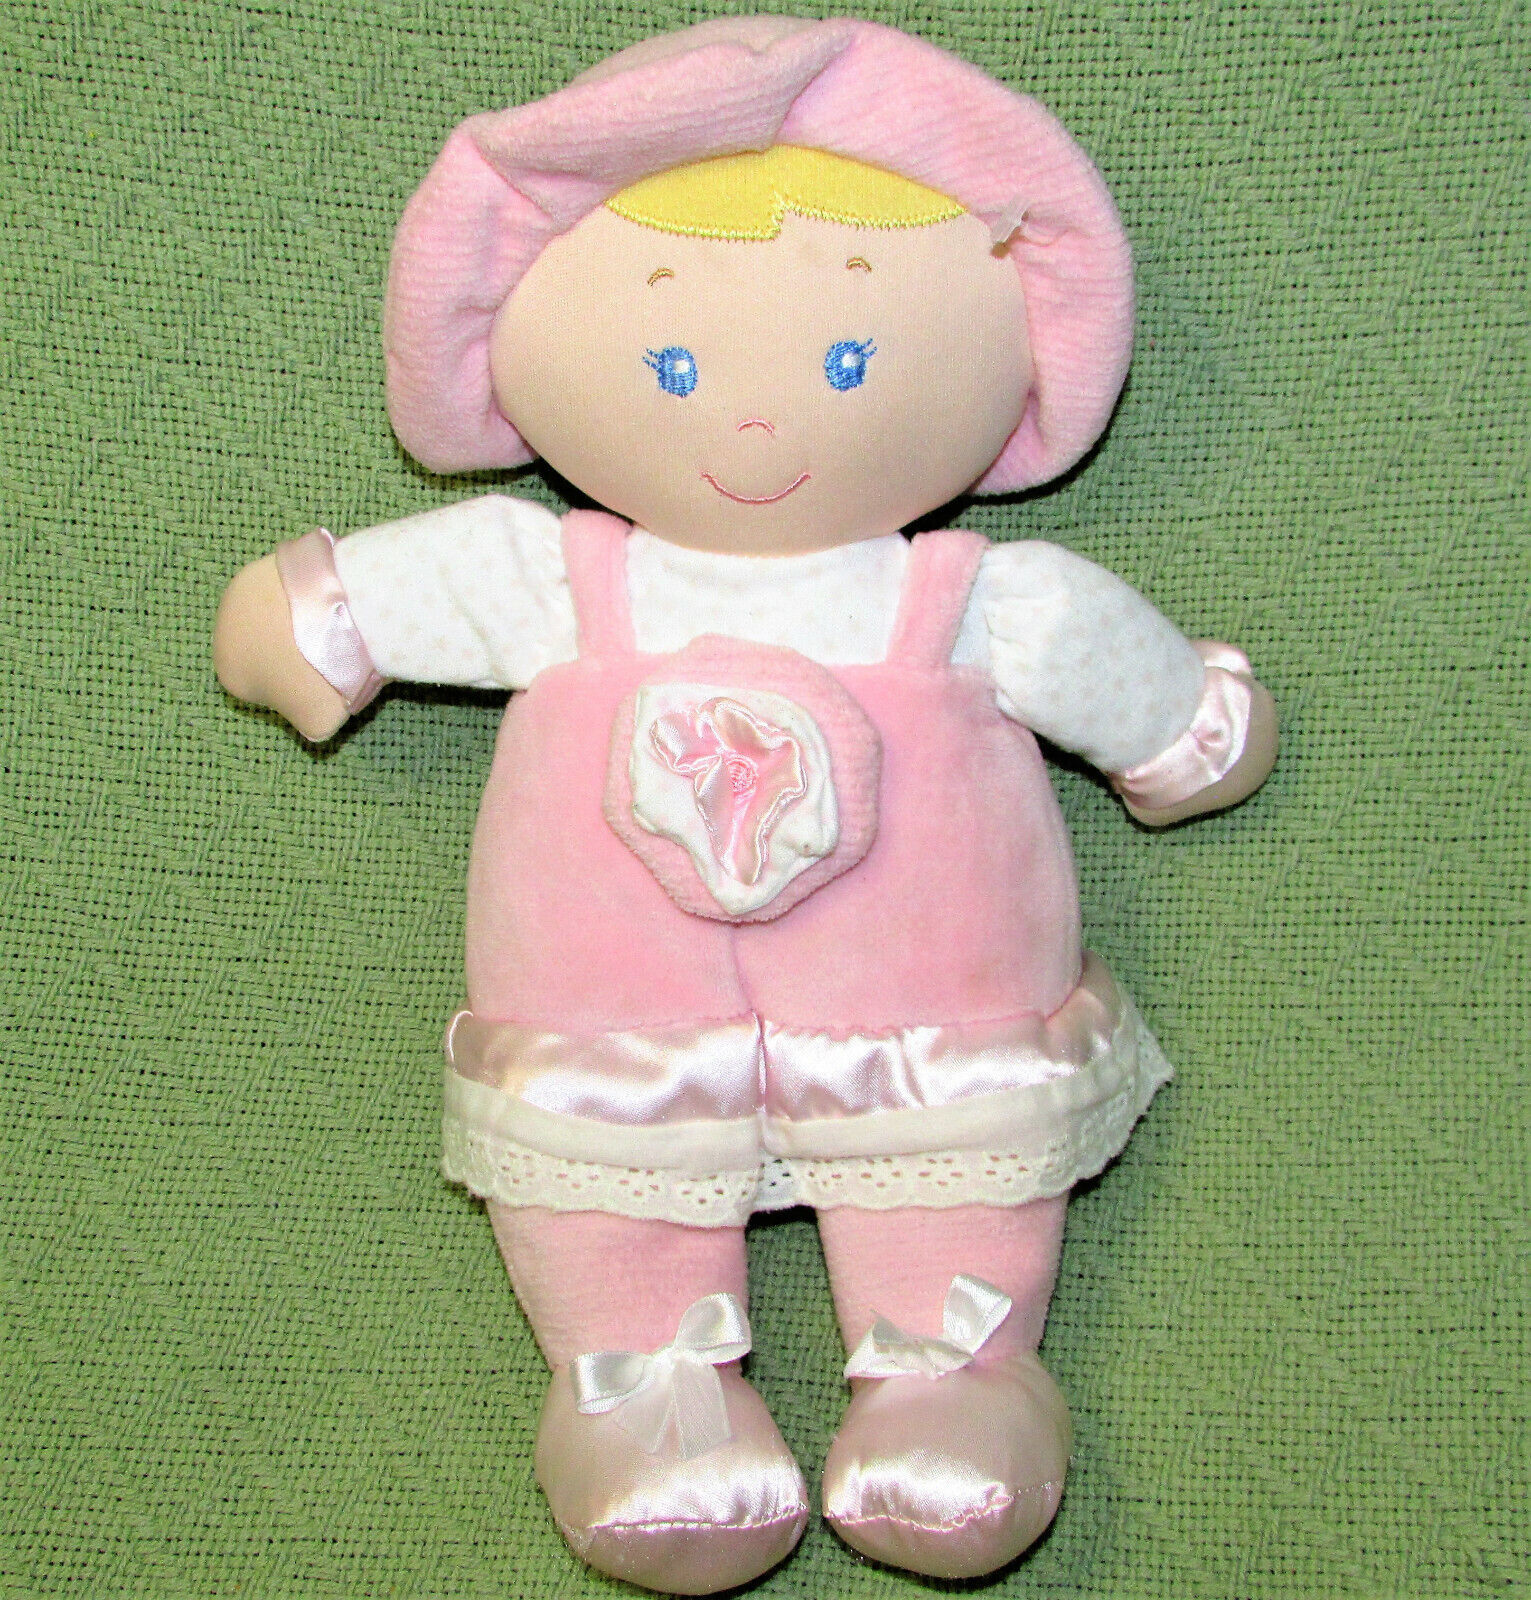 2013 KIDS PREFERRED DOLL PLUSH RATTLE 12" BABY GIRL PINK CRINKLE TOUCH HAT TOY - $22.50